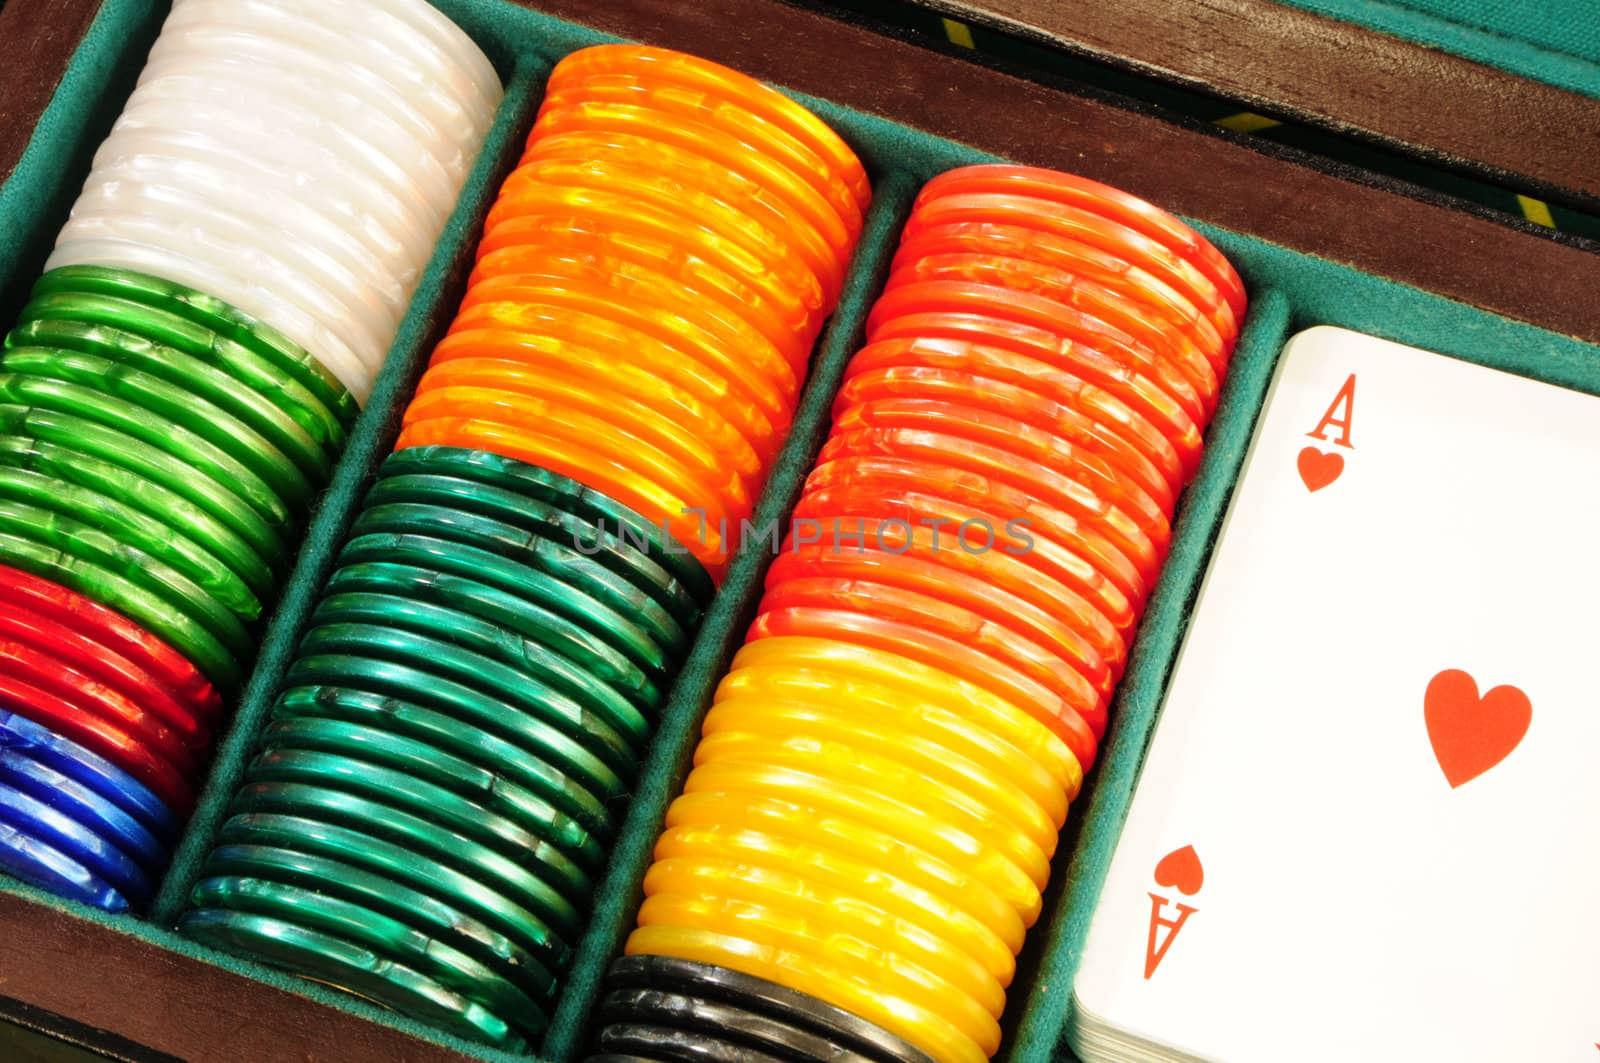 Casino chips and playing cards by dyoma